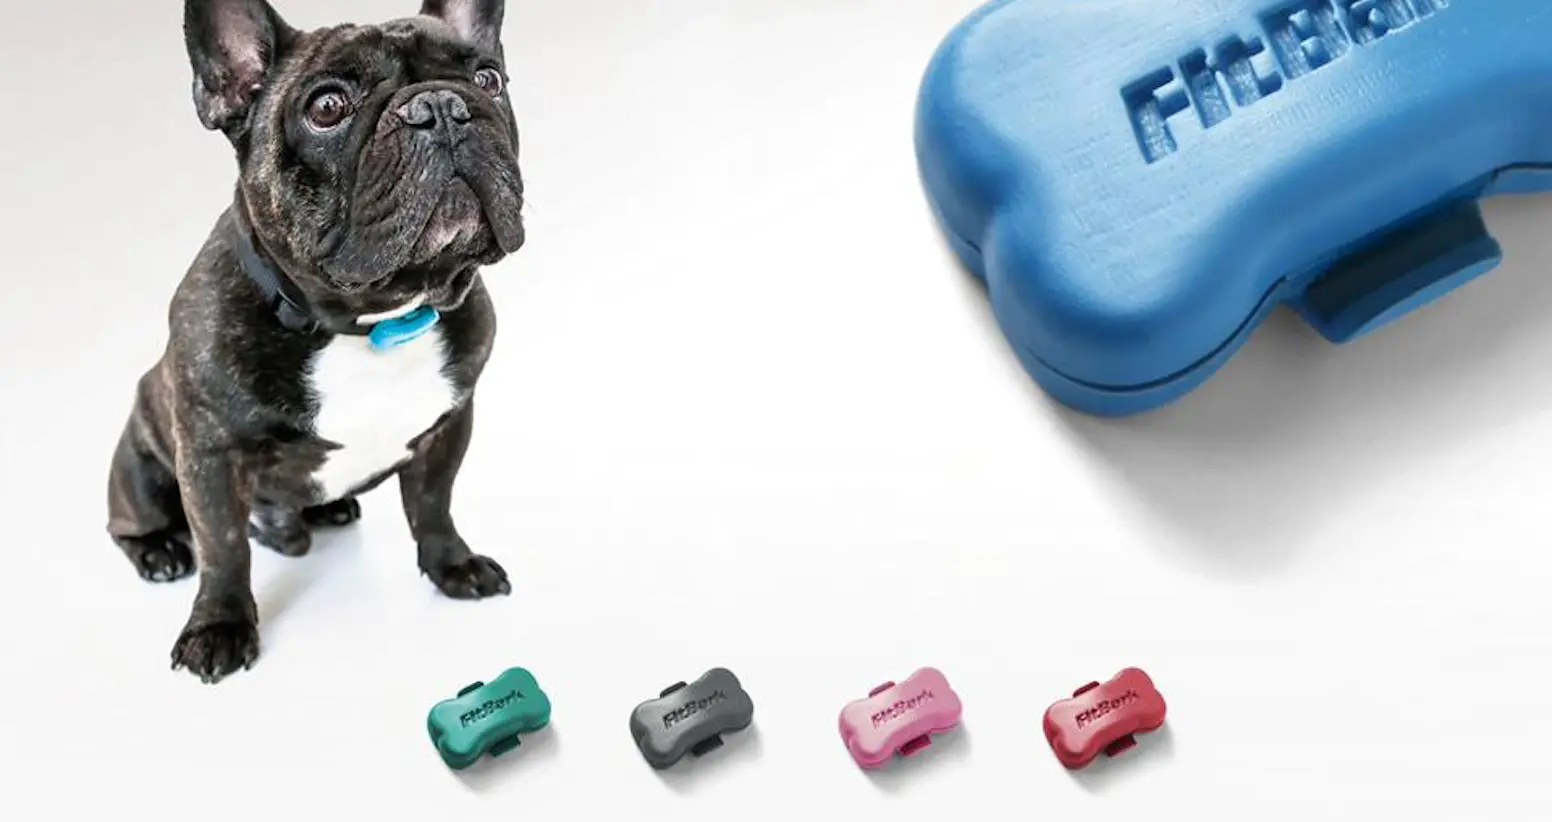 The FitBark activity monitor attached to a dog collar.